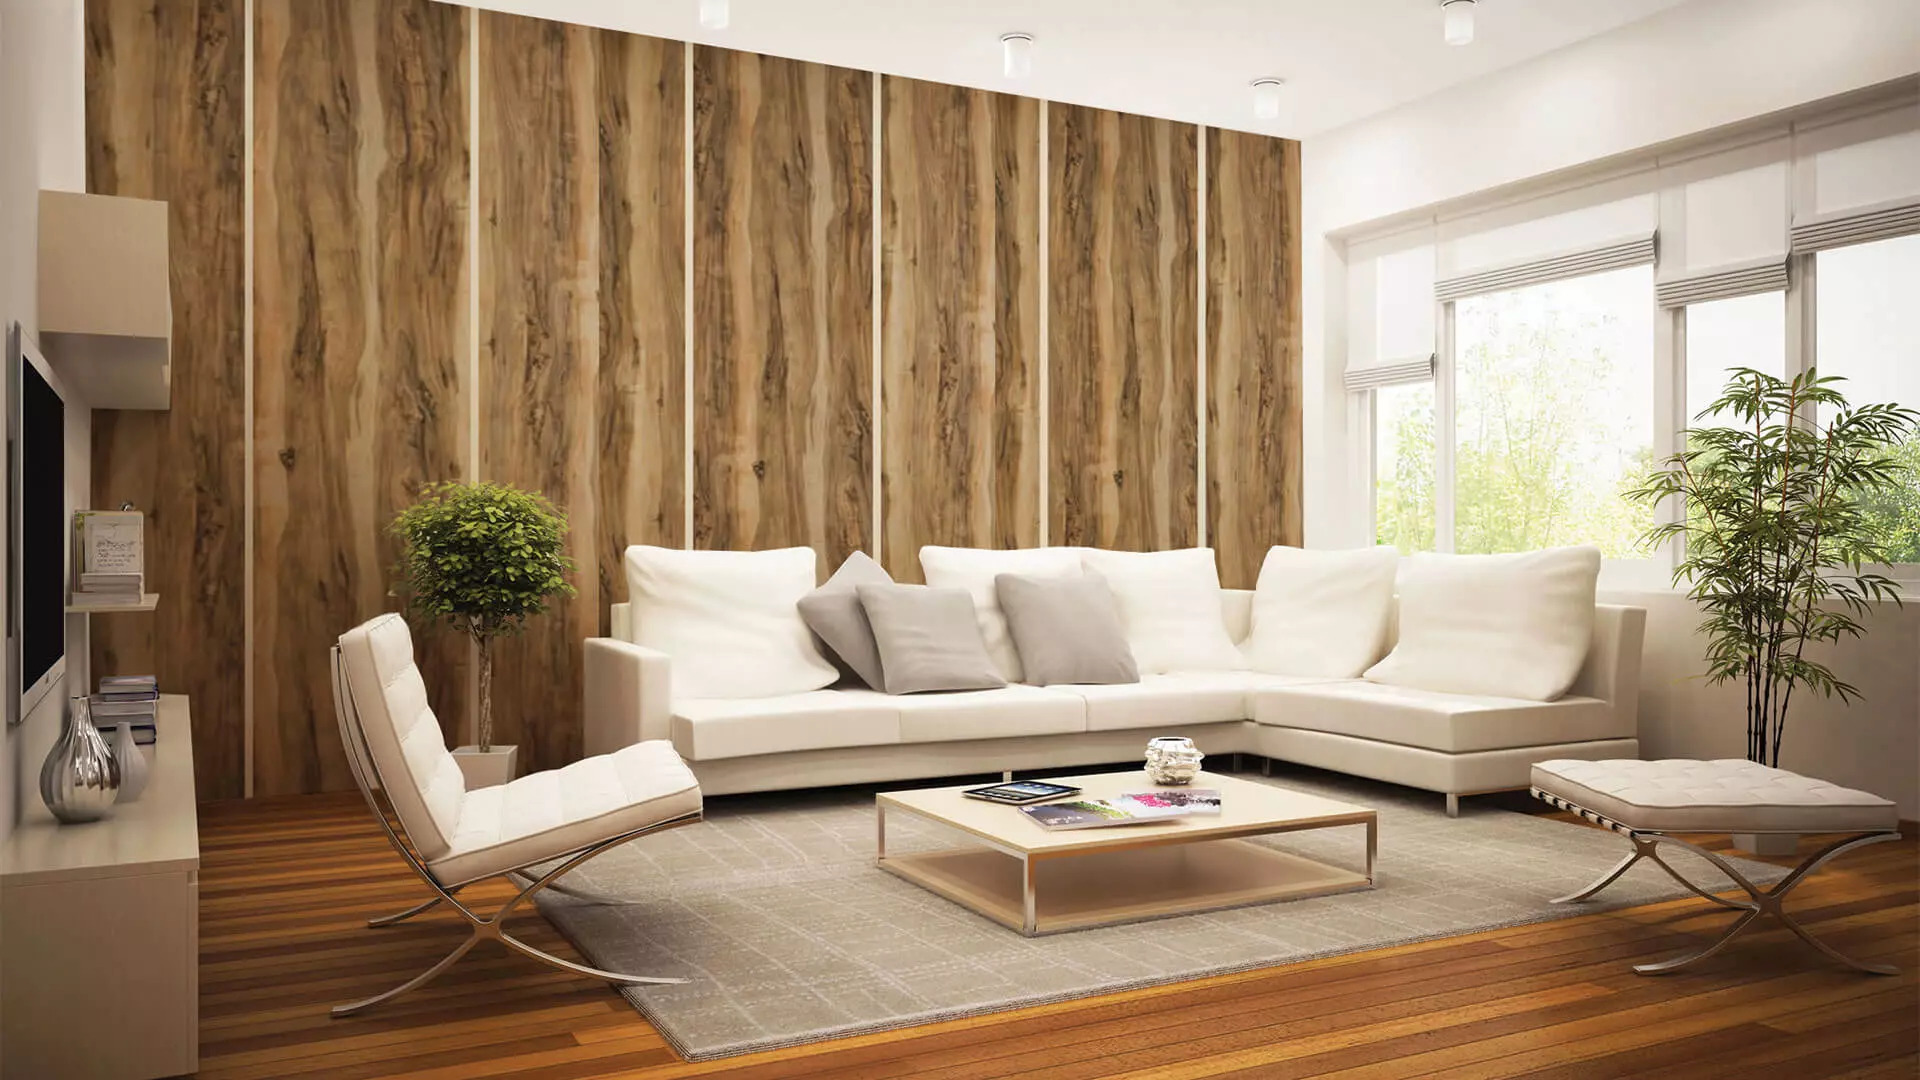 Give your House Interiors a Riveting look with Decorative Laminates